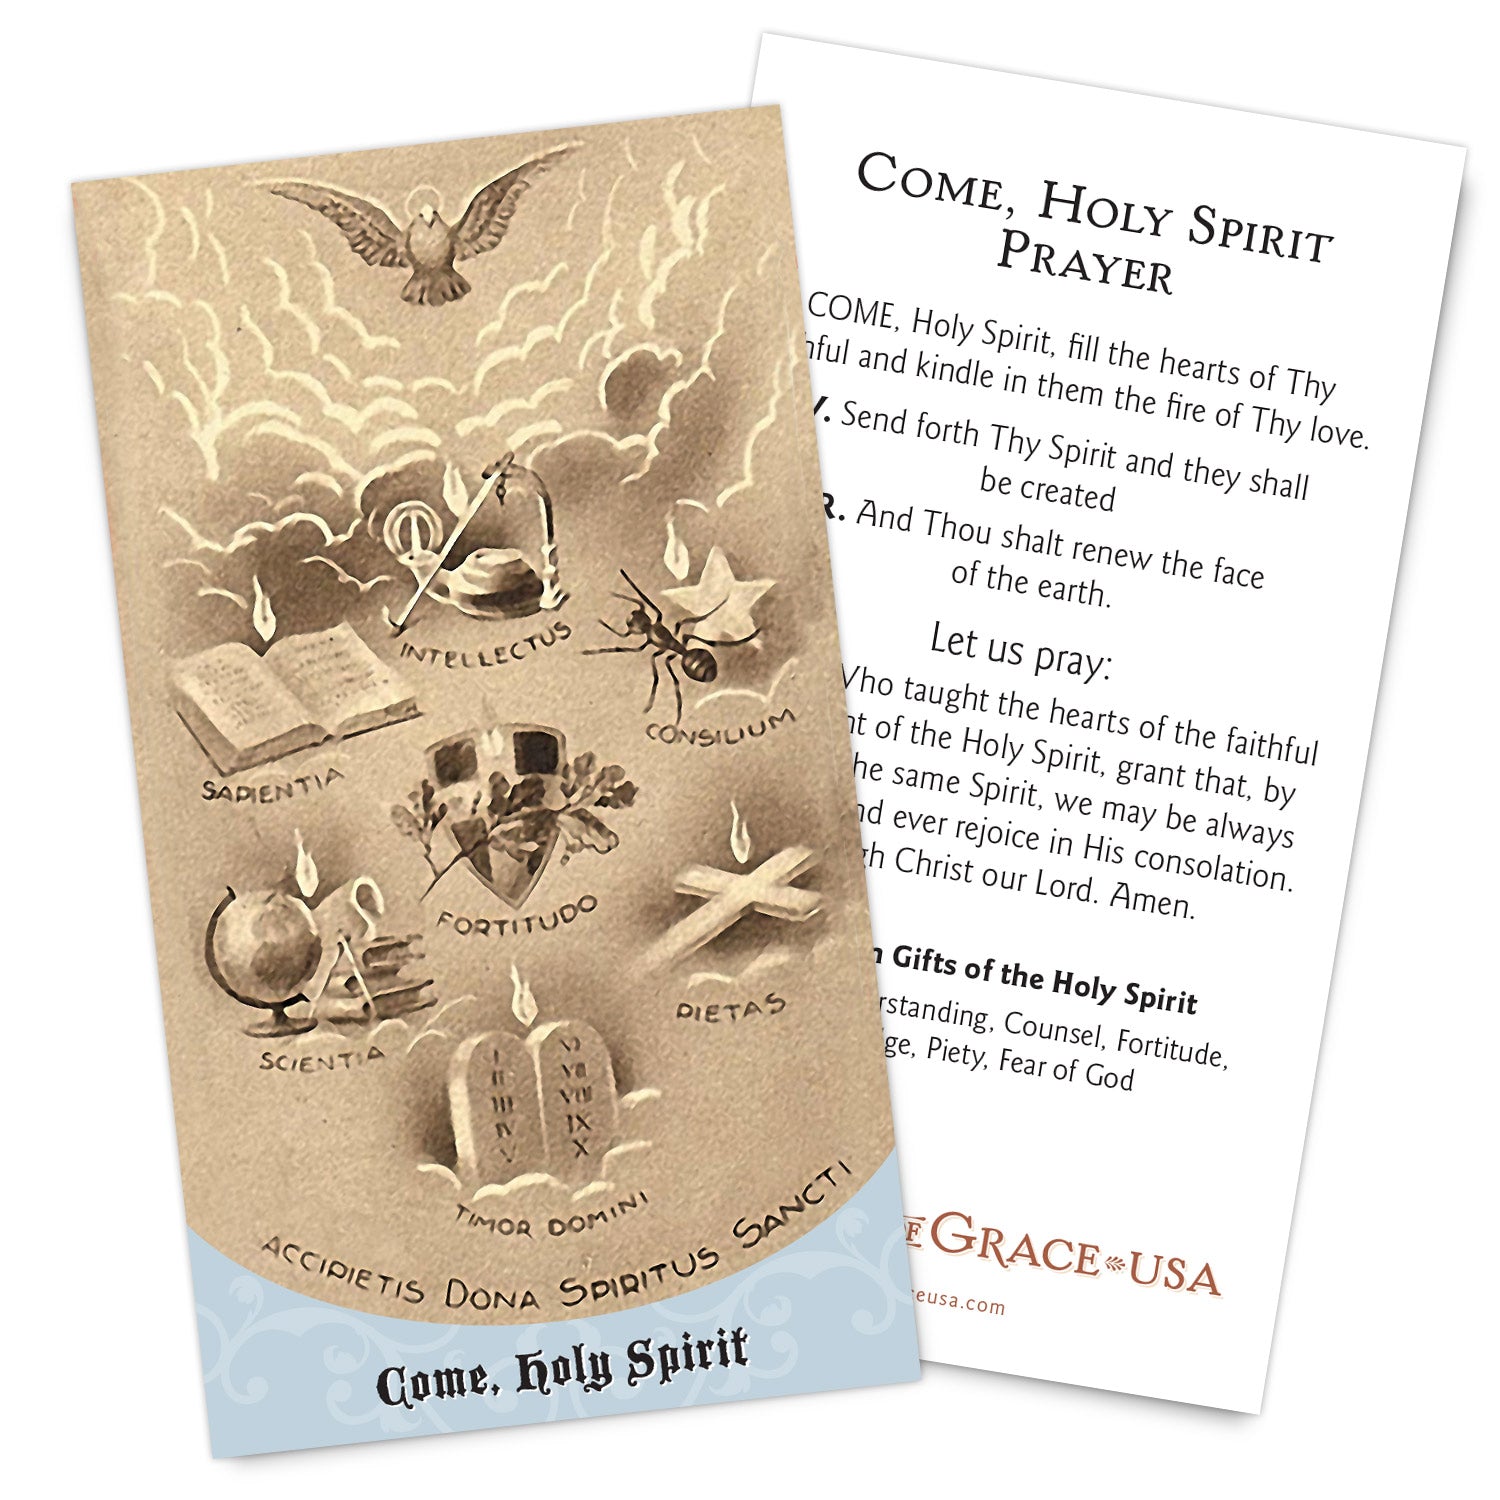 Come, Holy Spirit (Traditional) Holy Card.